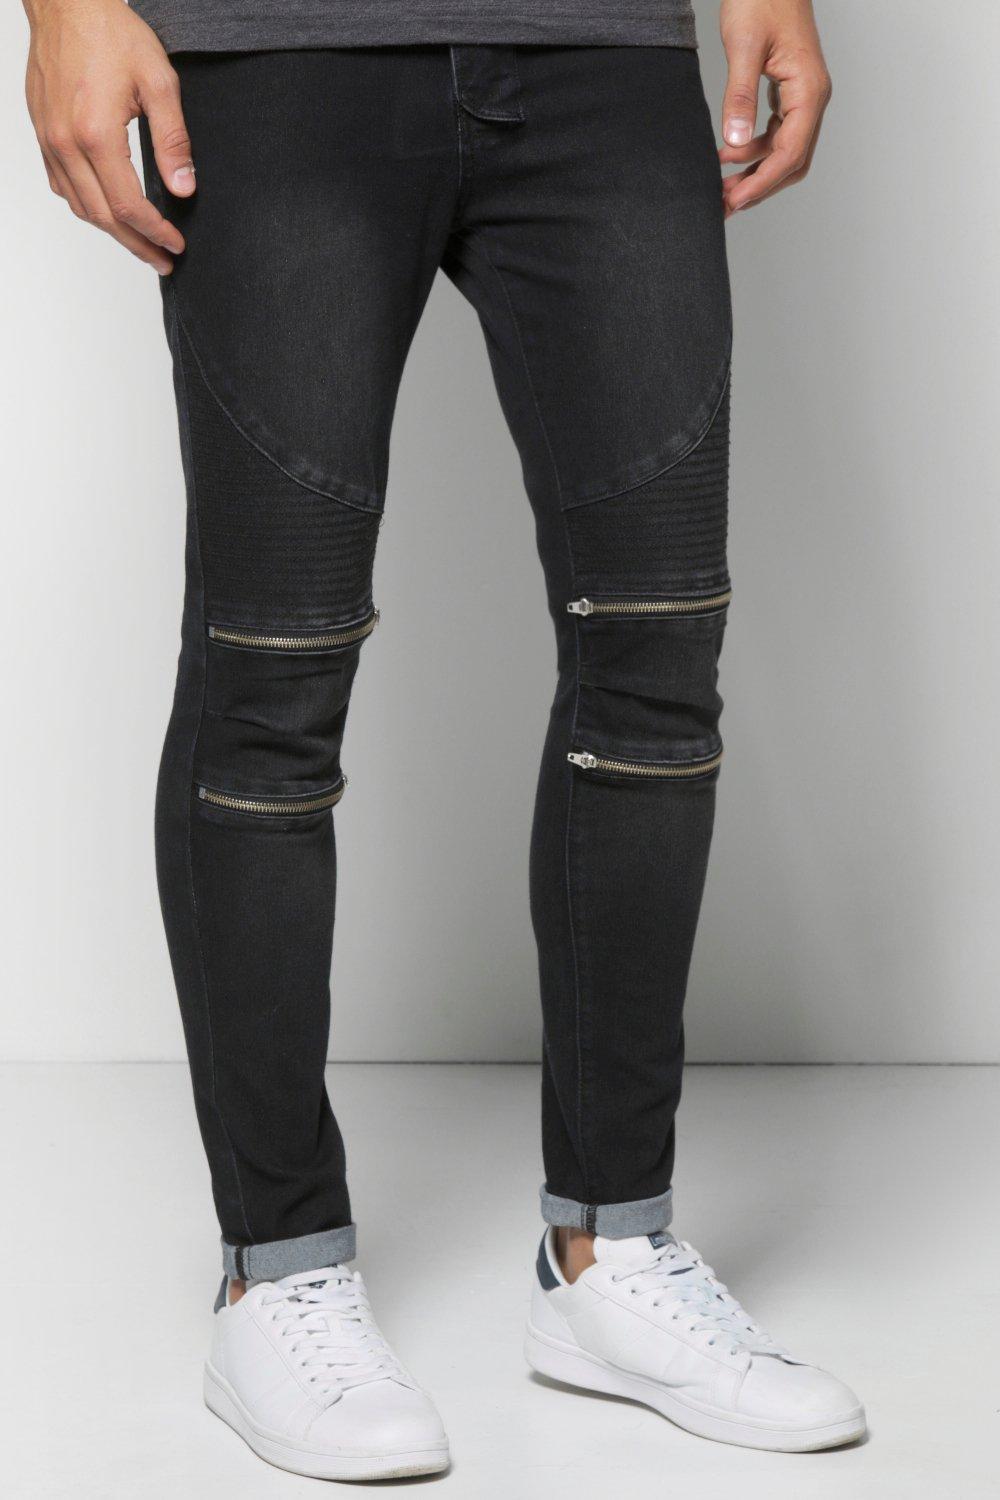 black jeans with zippers on knees